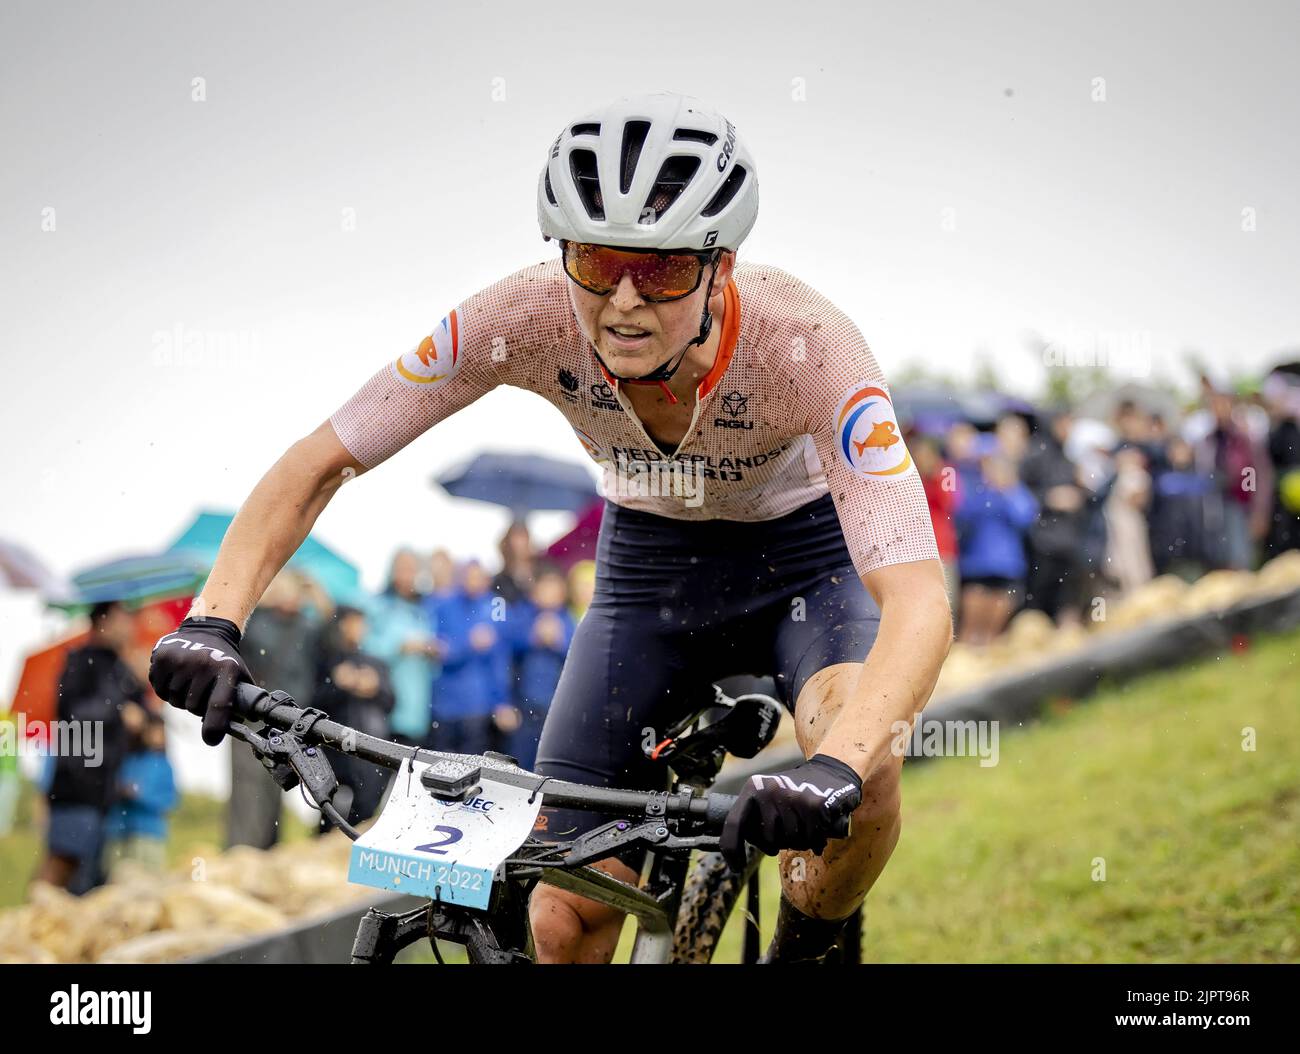 MUNCHEN - Anne Terpstra in action during the European Women's Mountain Bike  Championship on the tenth day of the Multi-European Championship. The  German city of Munich will host a combined European Championship